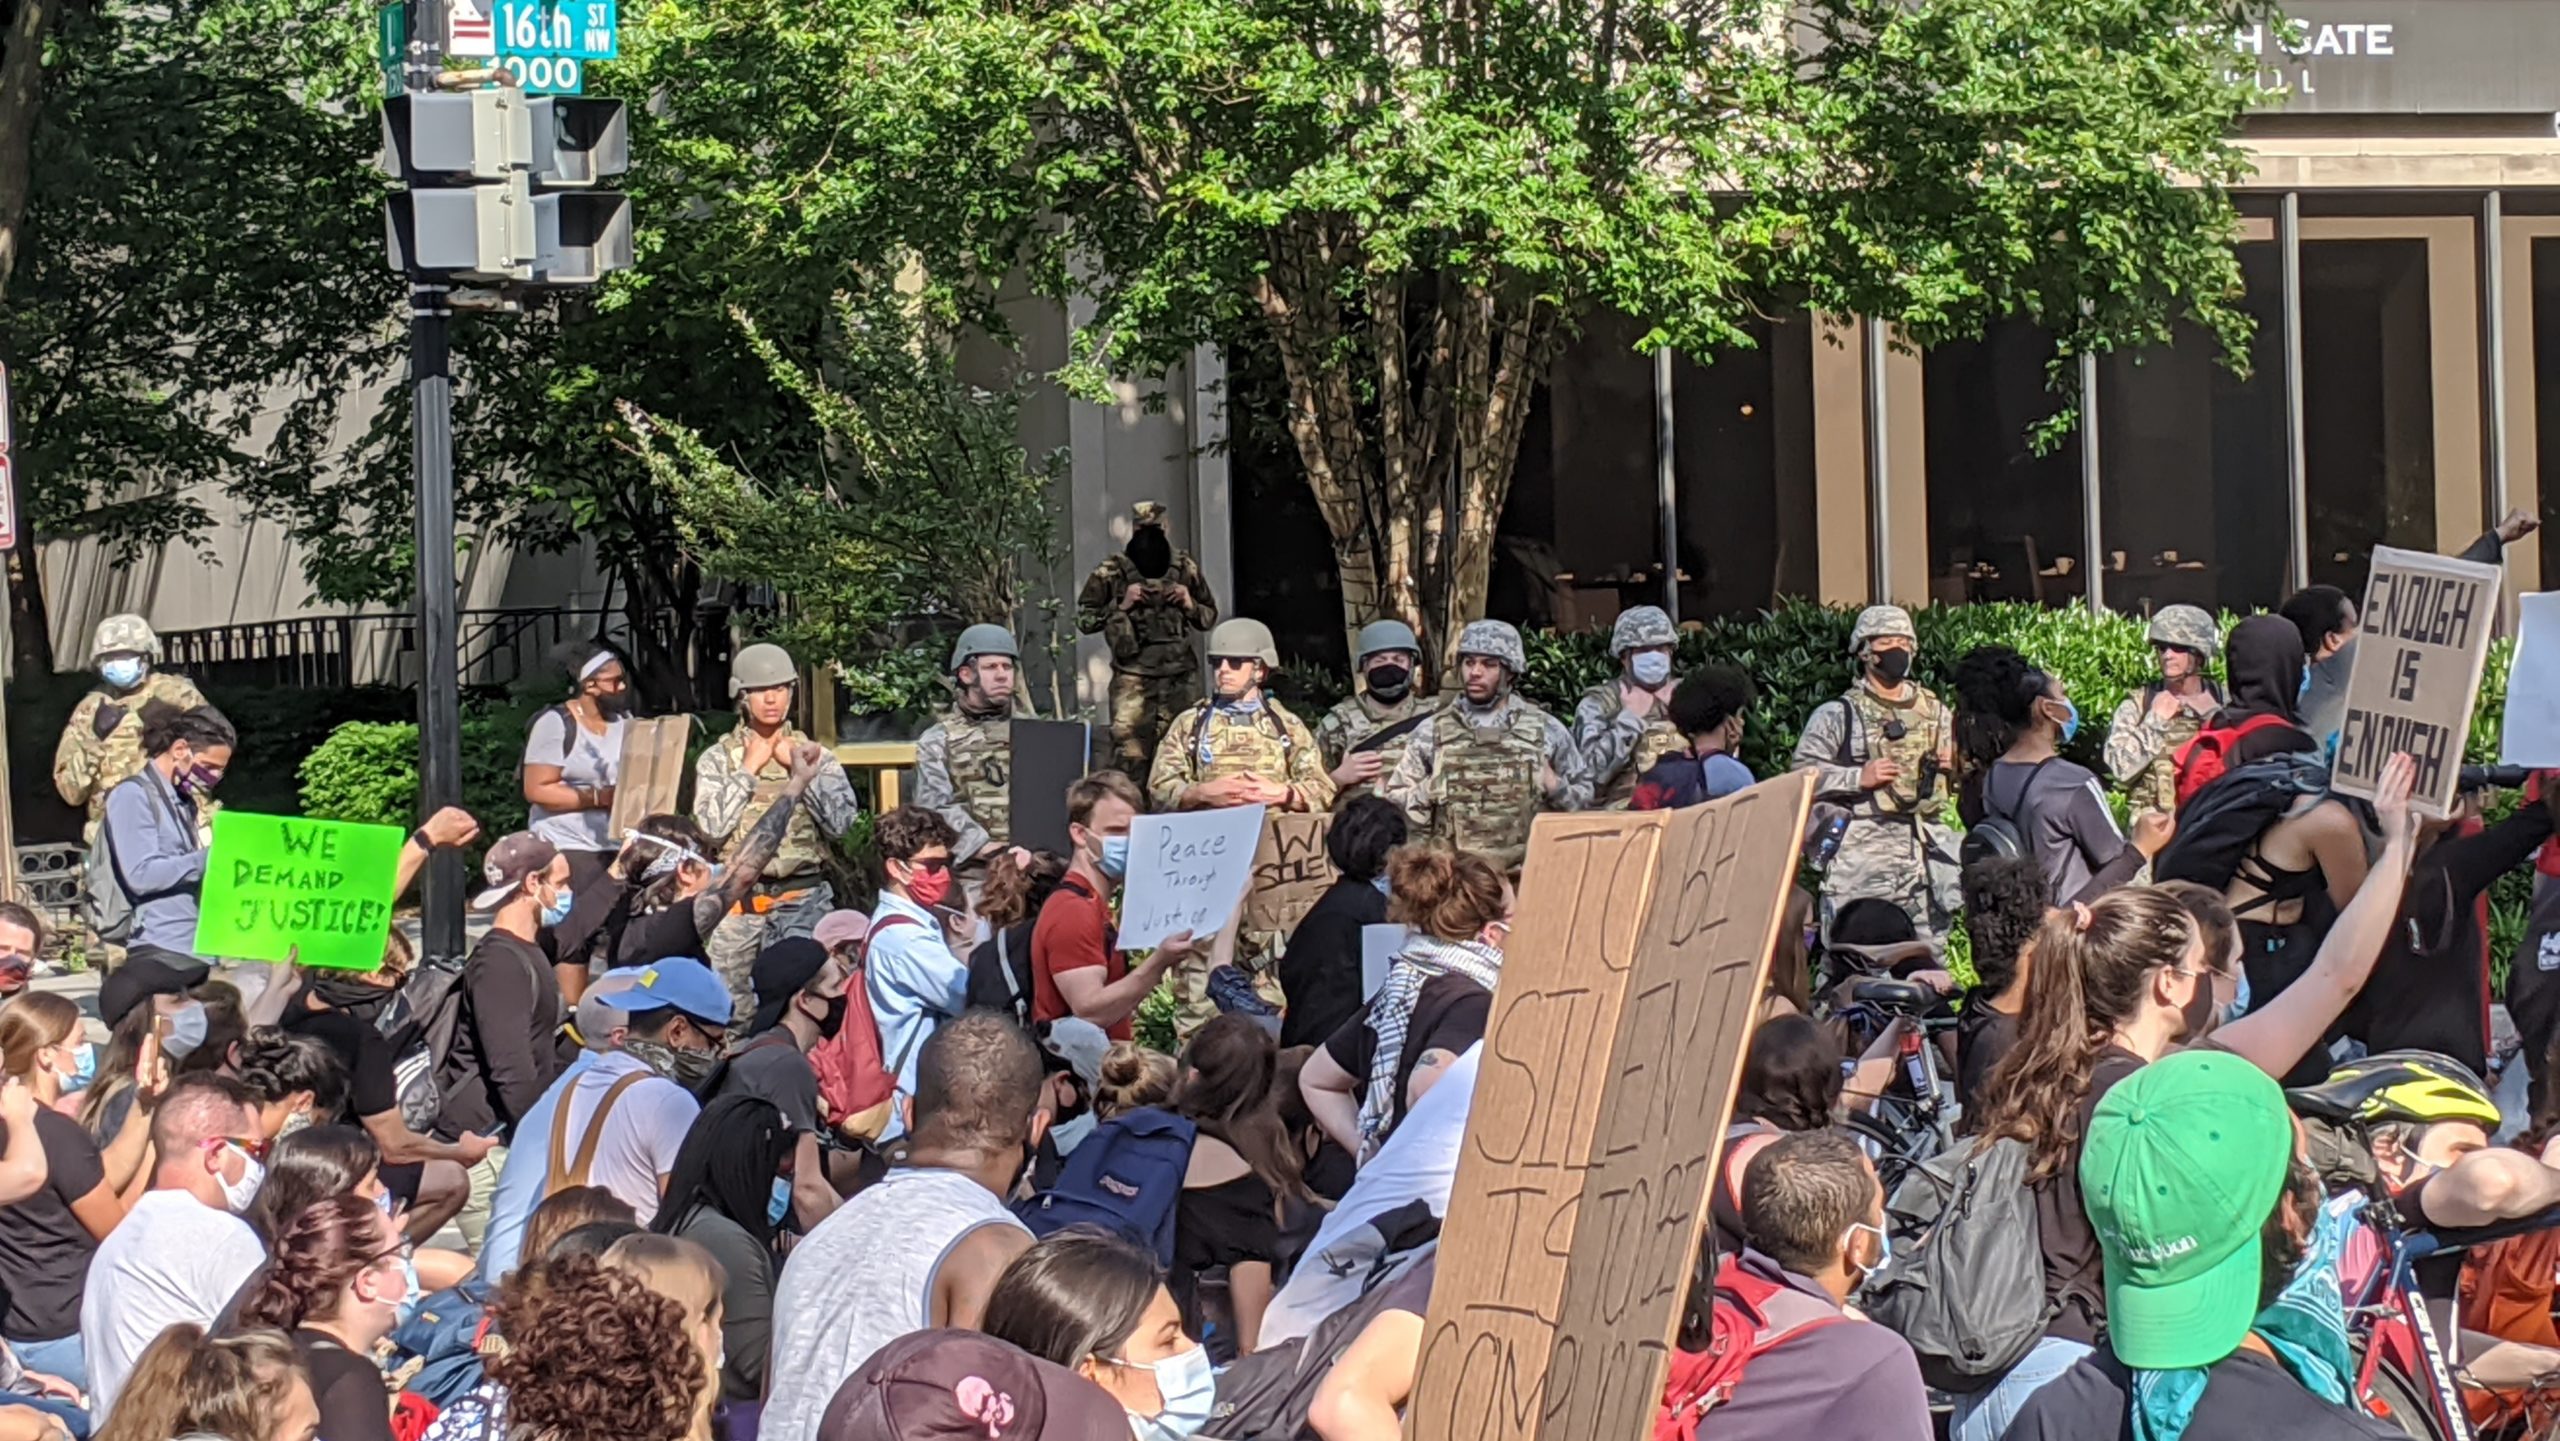 Soldiers observe protesters in D.C., June 2. (Photo: Tom McKay, Gizmodo)